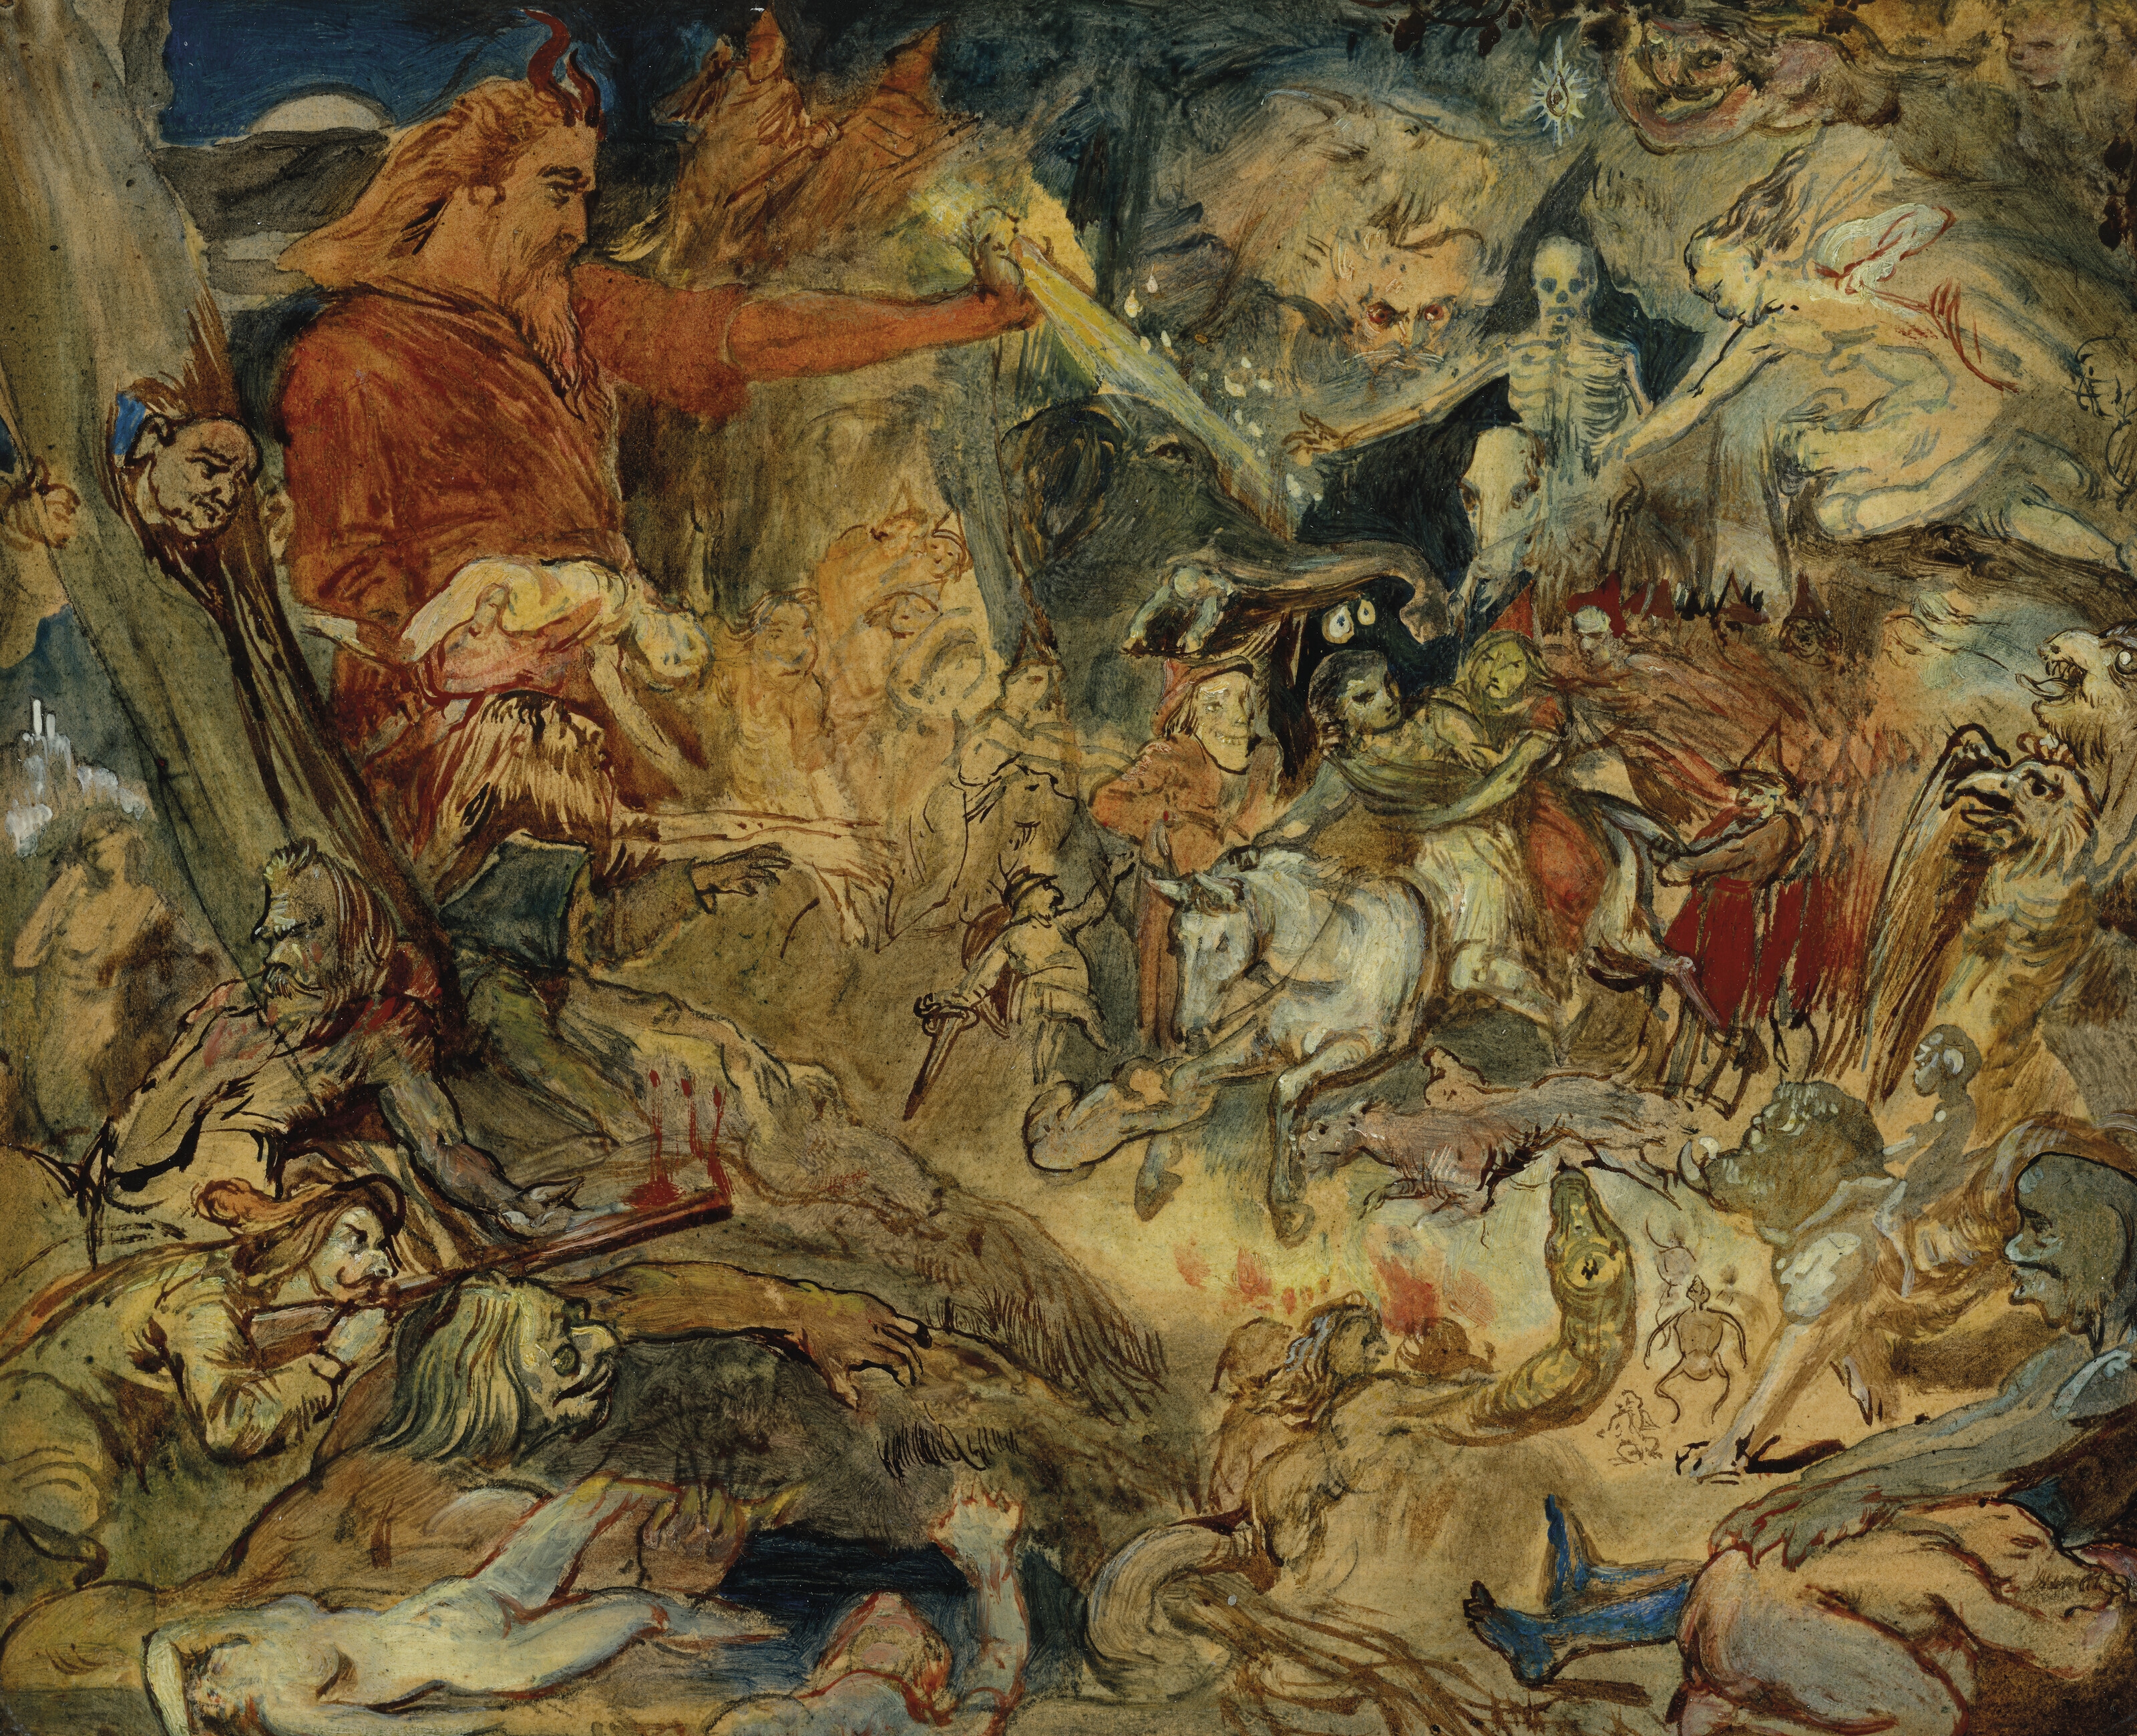 Artwork by Theodore von Holst, The Witches' Sabbath (Walpurgisnacht), Made of watercolour and bodycolour on paper